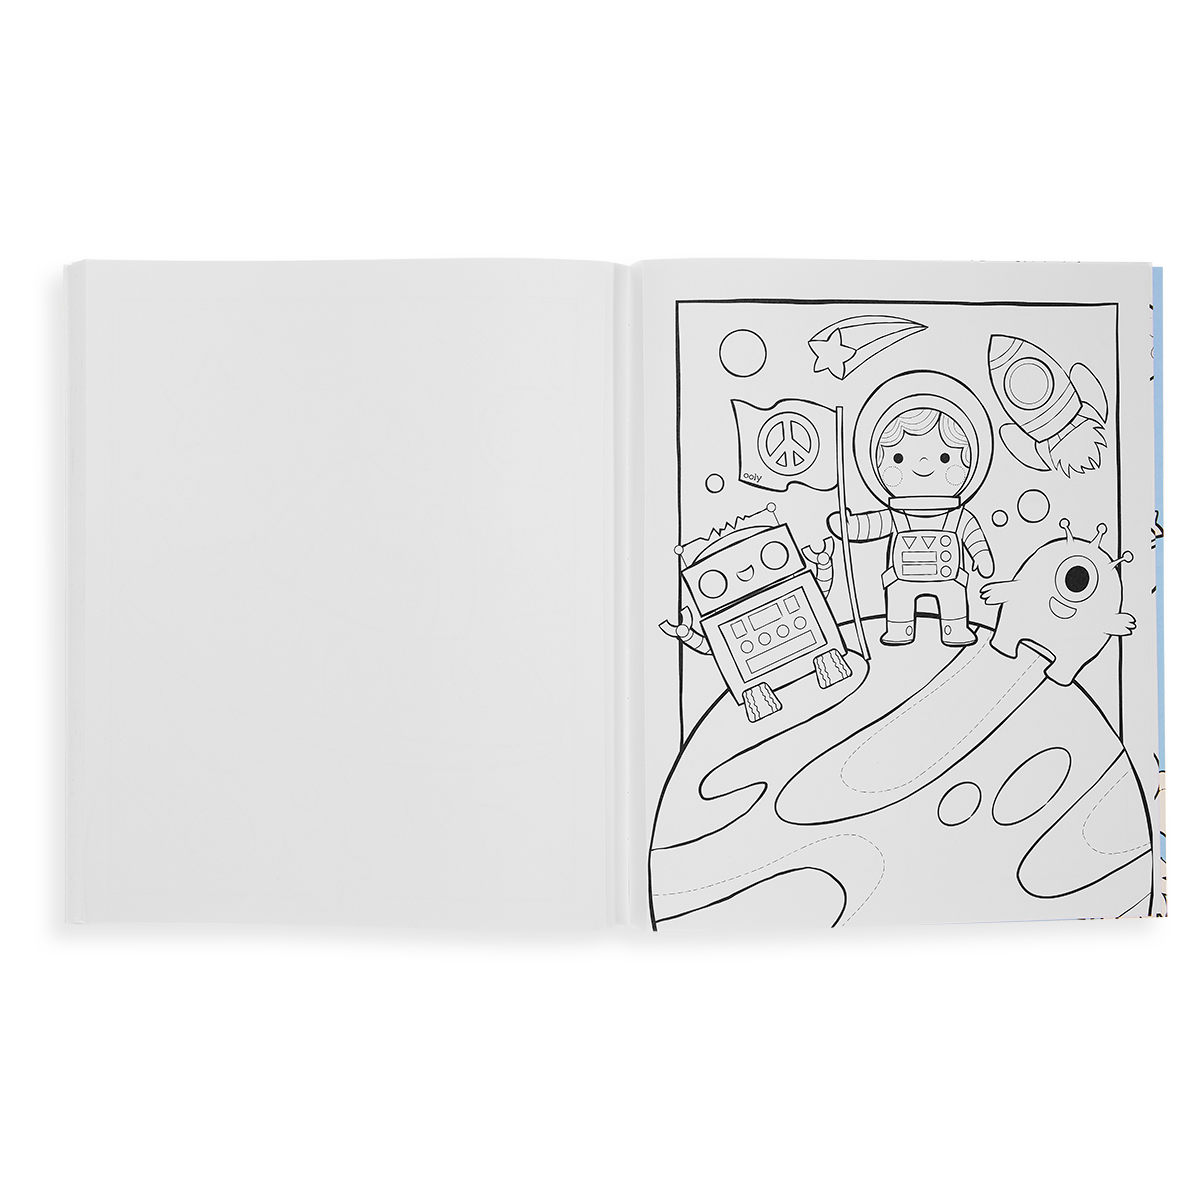 Outer Space Explorers Coloring Book page showing astronaut kid & robot & alien